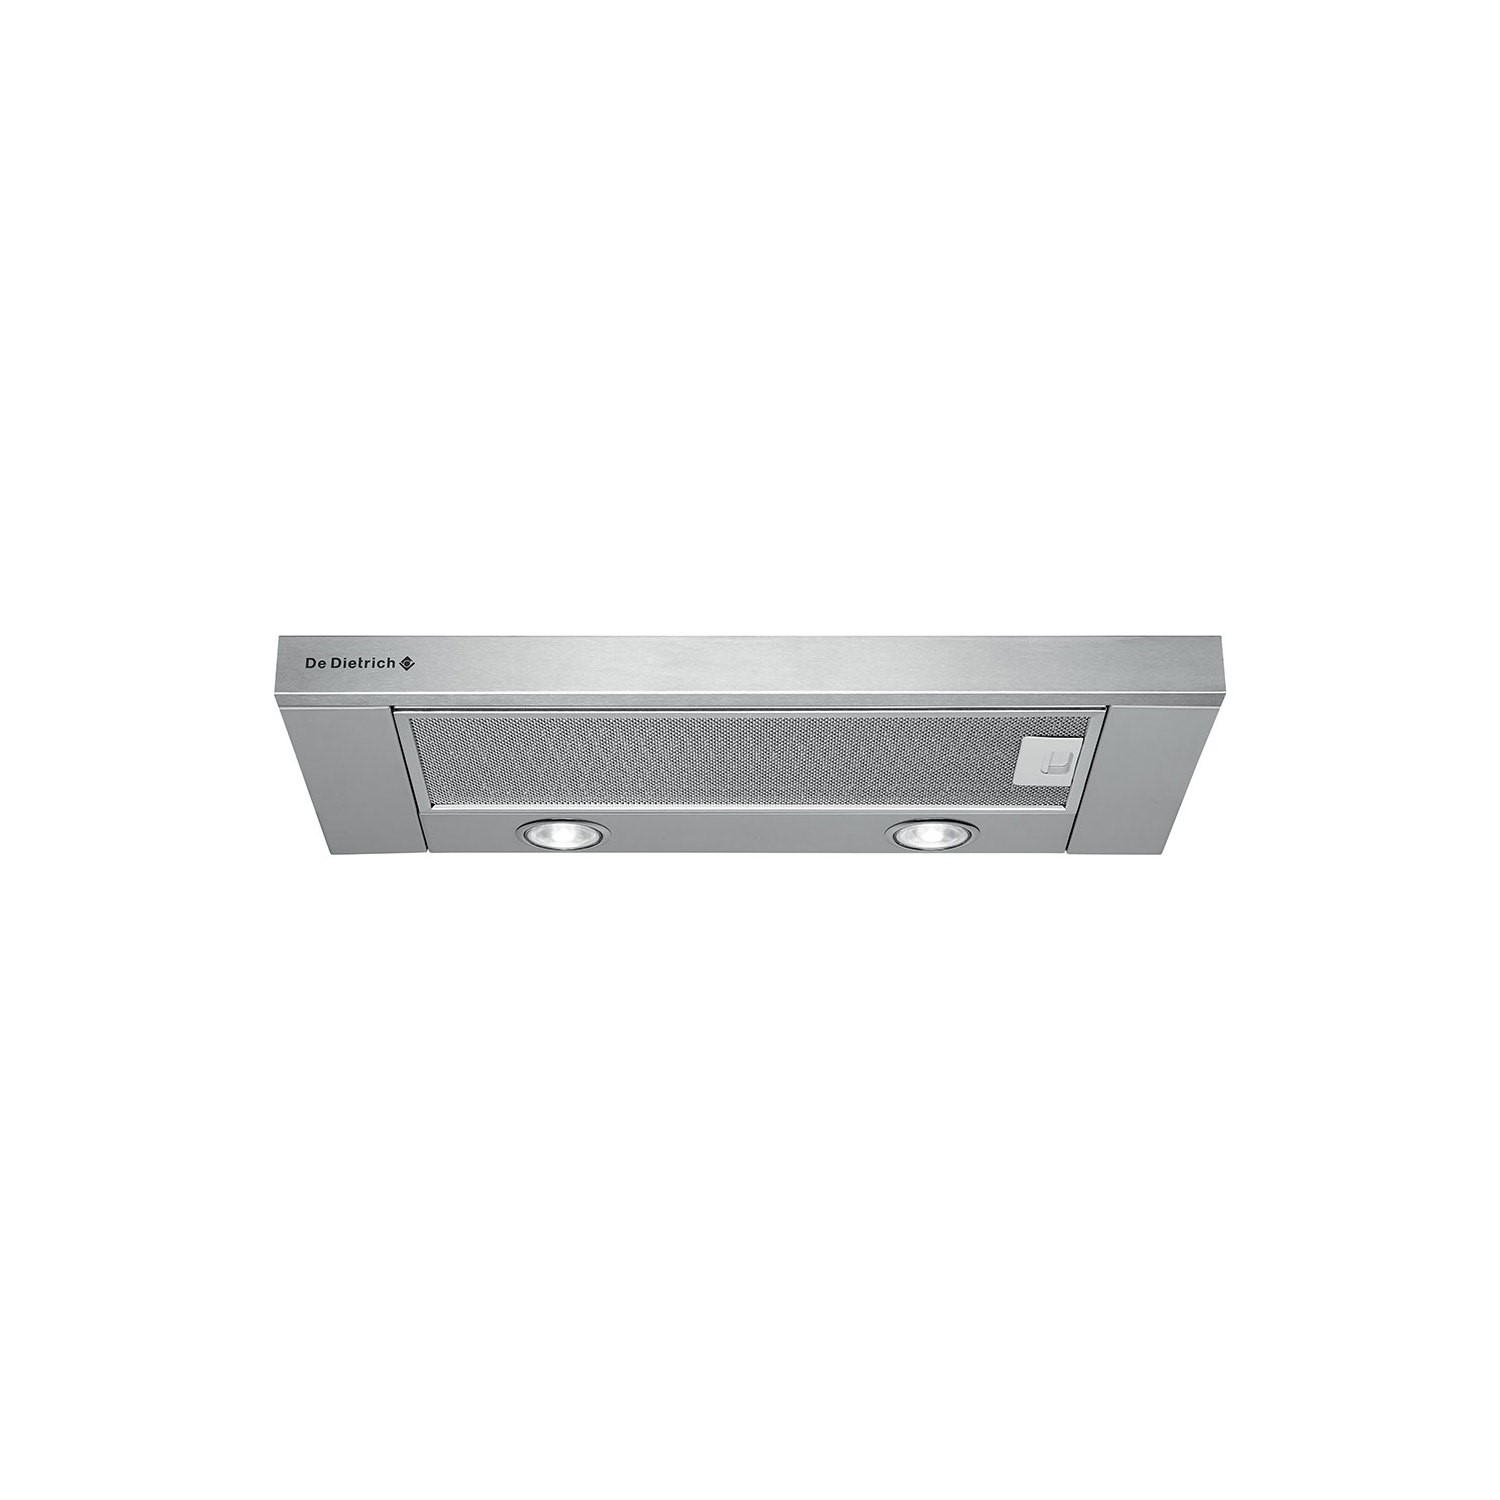 Refurbished De Dietrich DHT7156X 60cm Telescopic Canopy Cooker Hood Stainless Steel